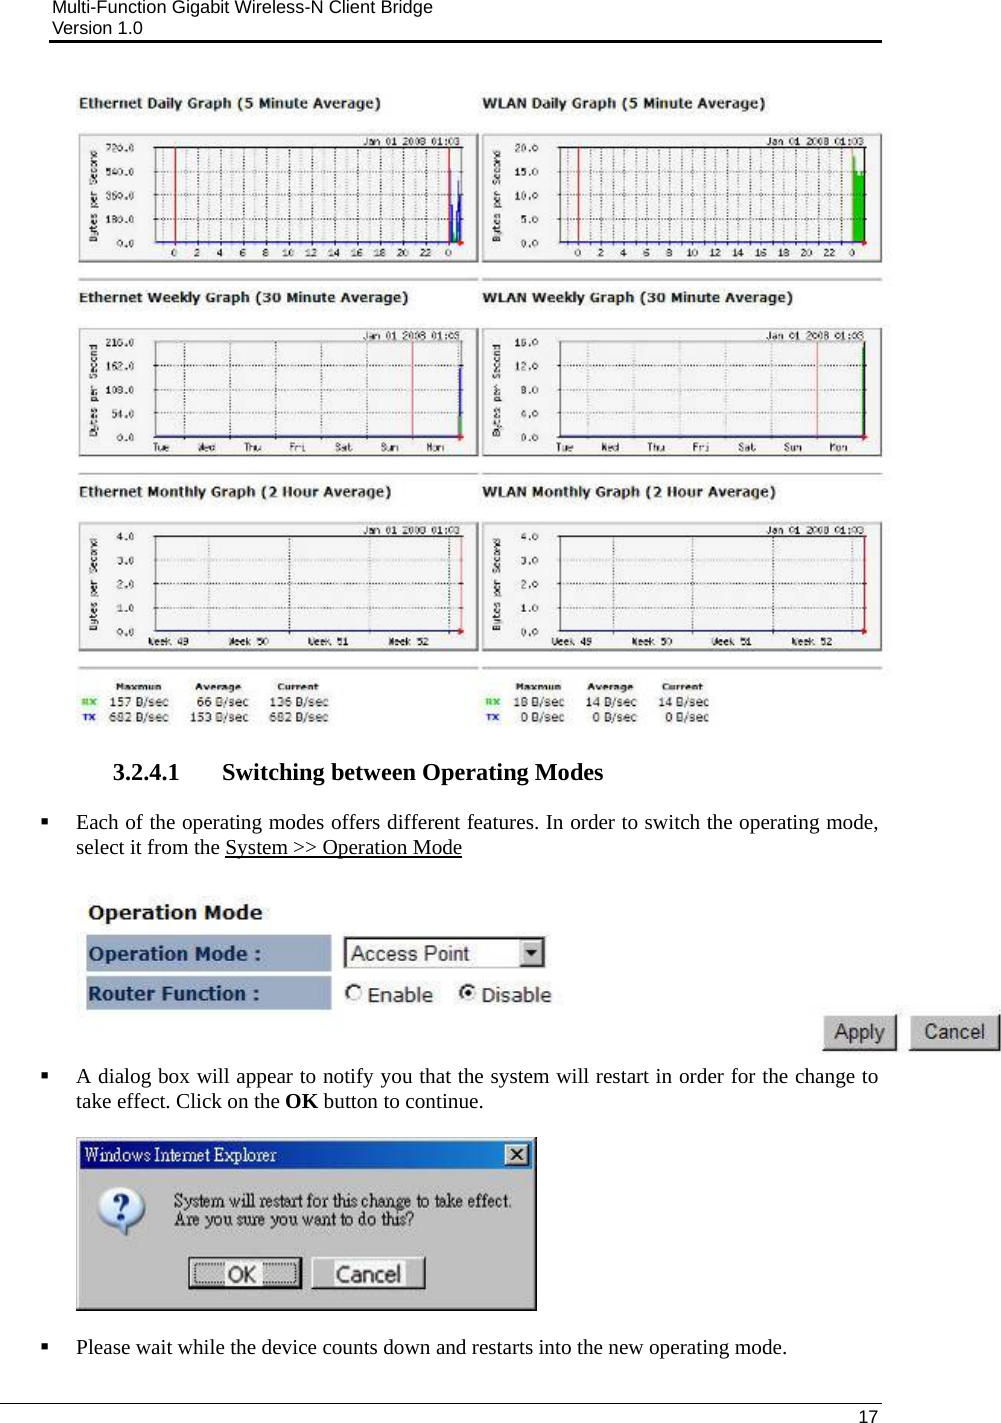 Multi-Function Gigabit Wireless-N Client Bridge                                         Version 1.0    17    3.2.4.1 Switching between Operating Modes  Each of the operating modes offers different features. In order to switch the operating mode, select it from the System &gt;&gt; Operation Mode    A dialog box will appear to notify you that the system will restart in order for the change to take effect. Click on the OK button to continue.      Please wait while the device counts down and restarts into the new operating mode.  